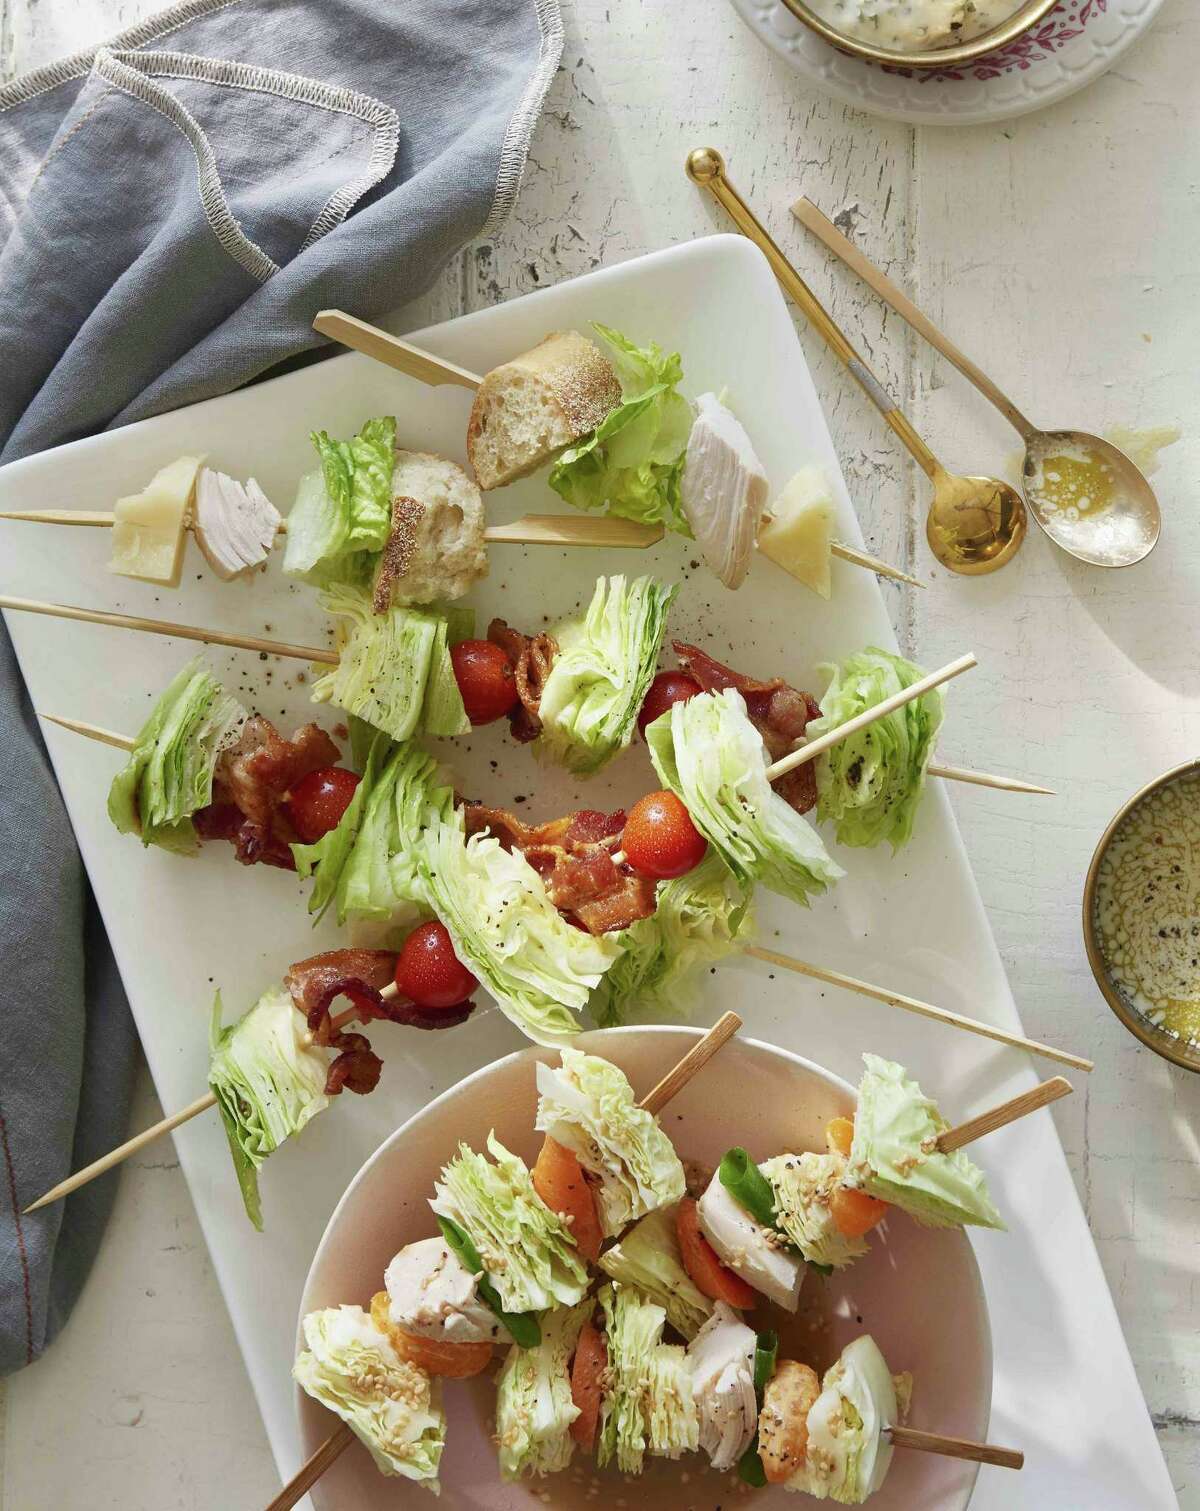 Salad Kebabs from ”Stirring up Fun with Food” by Sarah Michelle Gellar and Gia Russo.